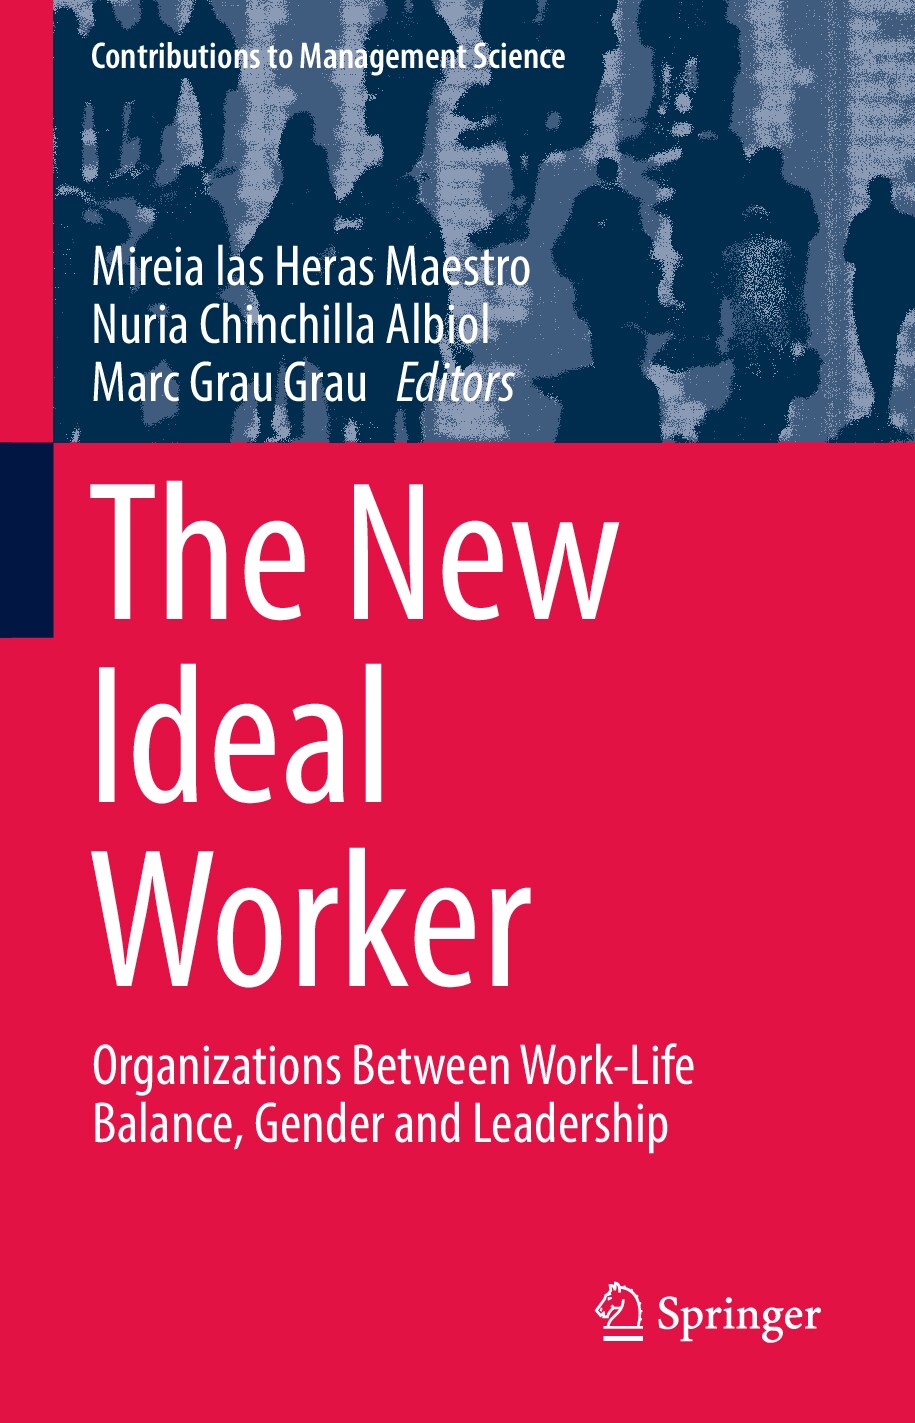 (Contributions to Management Science) Mireia las Heras Maestro, Nuria Chinchilla Albiol, Marc Grau Grau - The New Ideal Worker_ Organizations Between Work-Life Balance, Gender and Leadership-Springer 